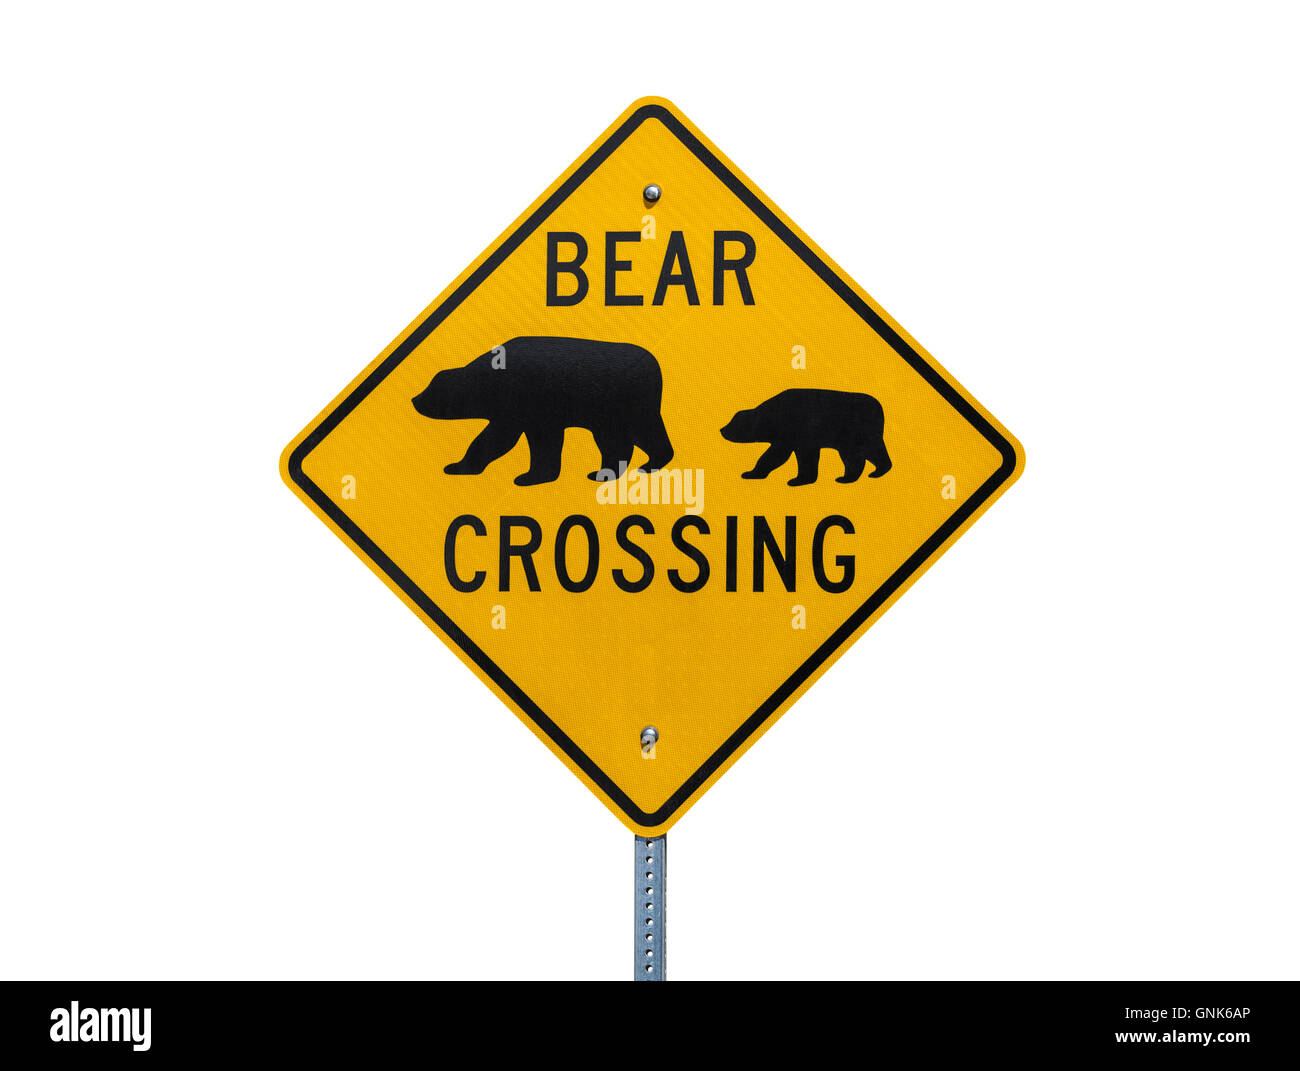 Bear Crossing highway sign isolated on white. Stock Photo